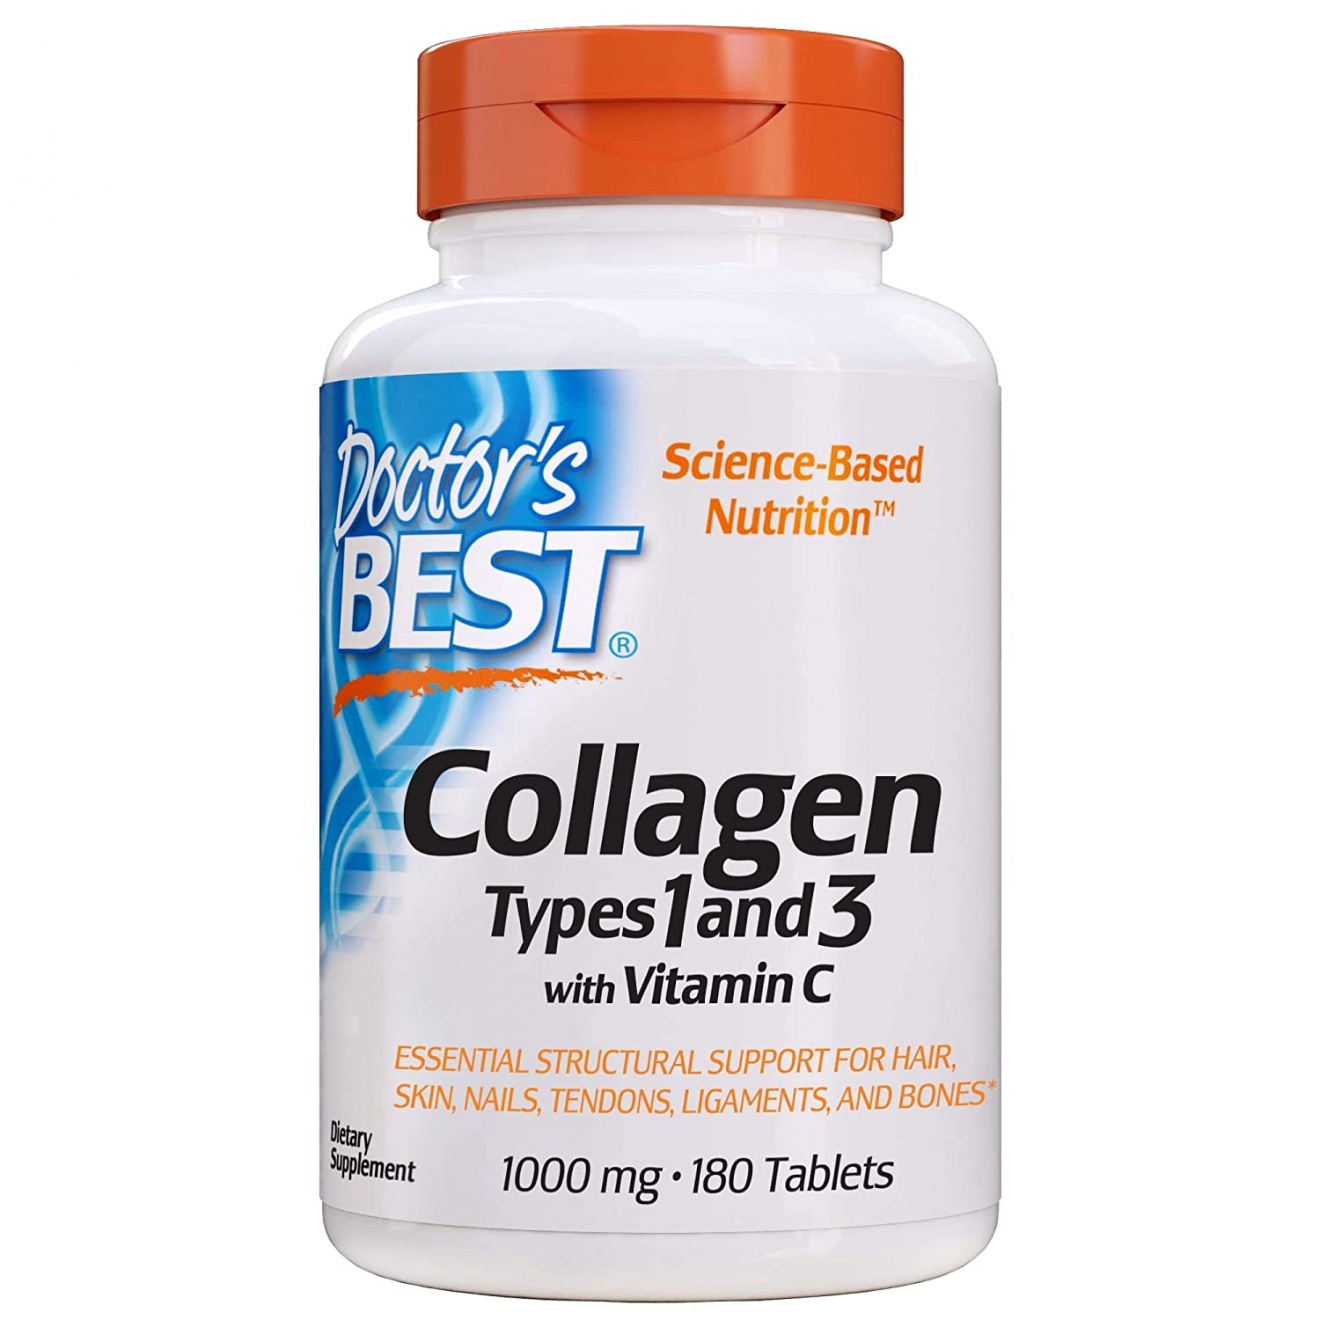 Коллаген в таблетках, Doctors Best, Collagen Types 1 and 3 with Peptan and Vitamin C, 1,000 mg, 180 Tablets